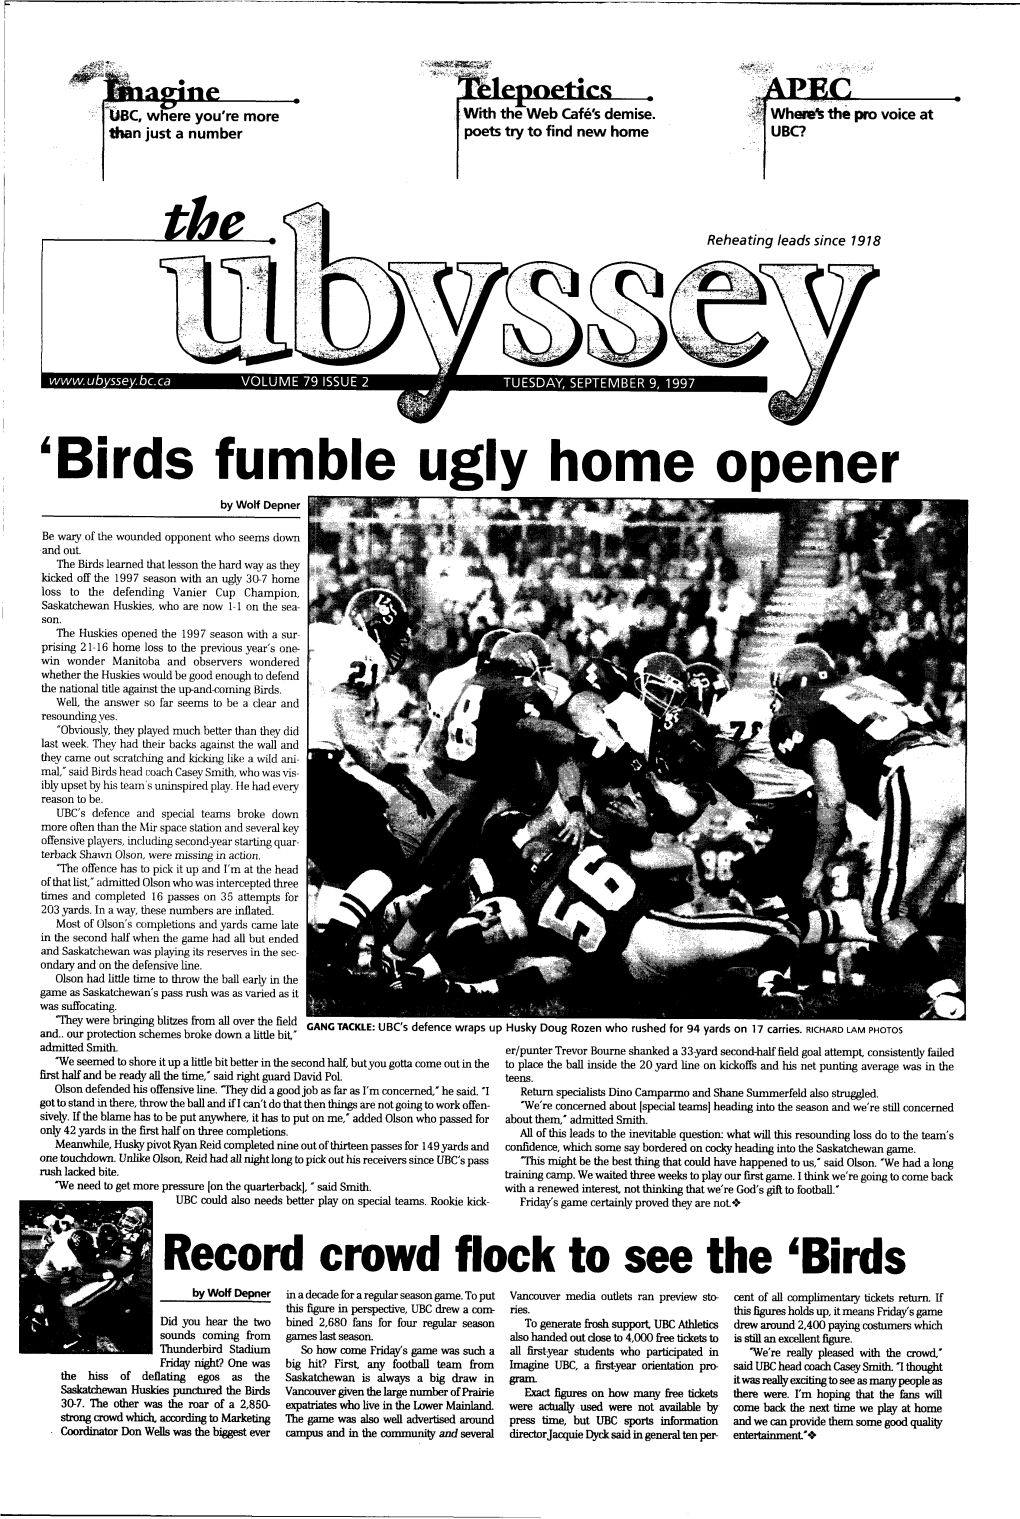 'Birds Fumble Ugly Home Opener by Wolf Depner